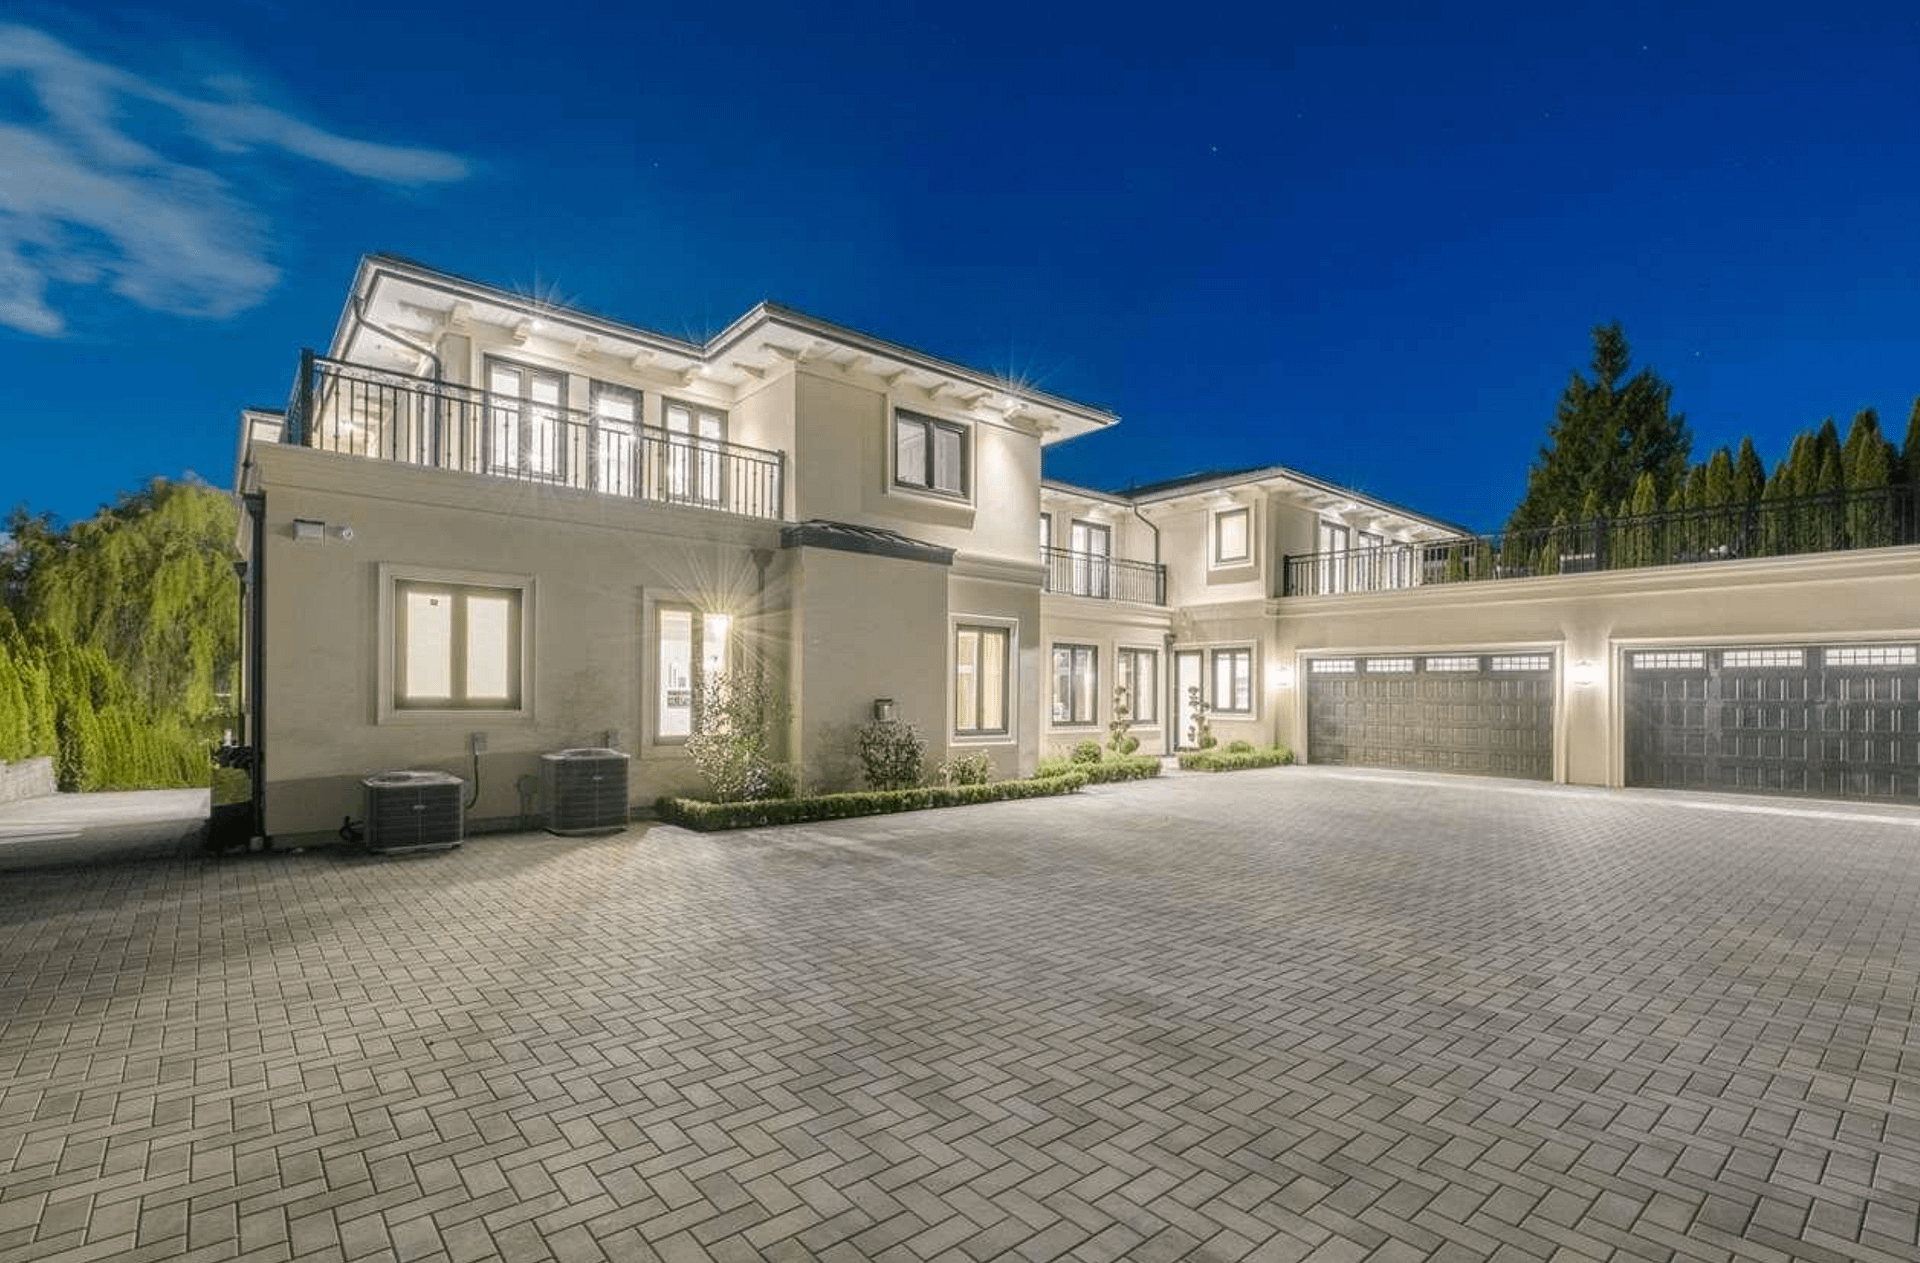 13,000 Square Foot Home In West Vancouver (PHOTOS)